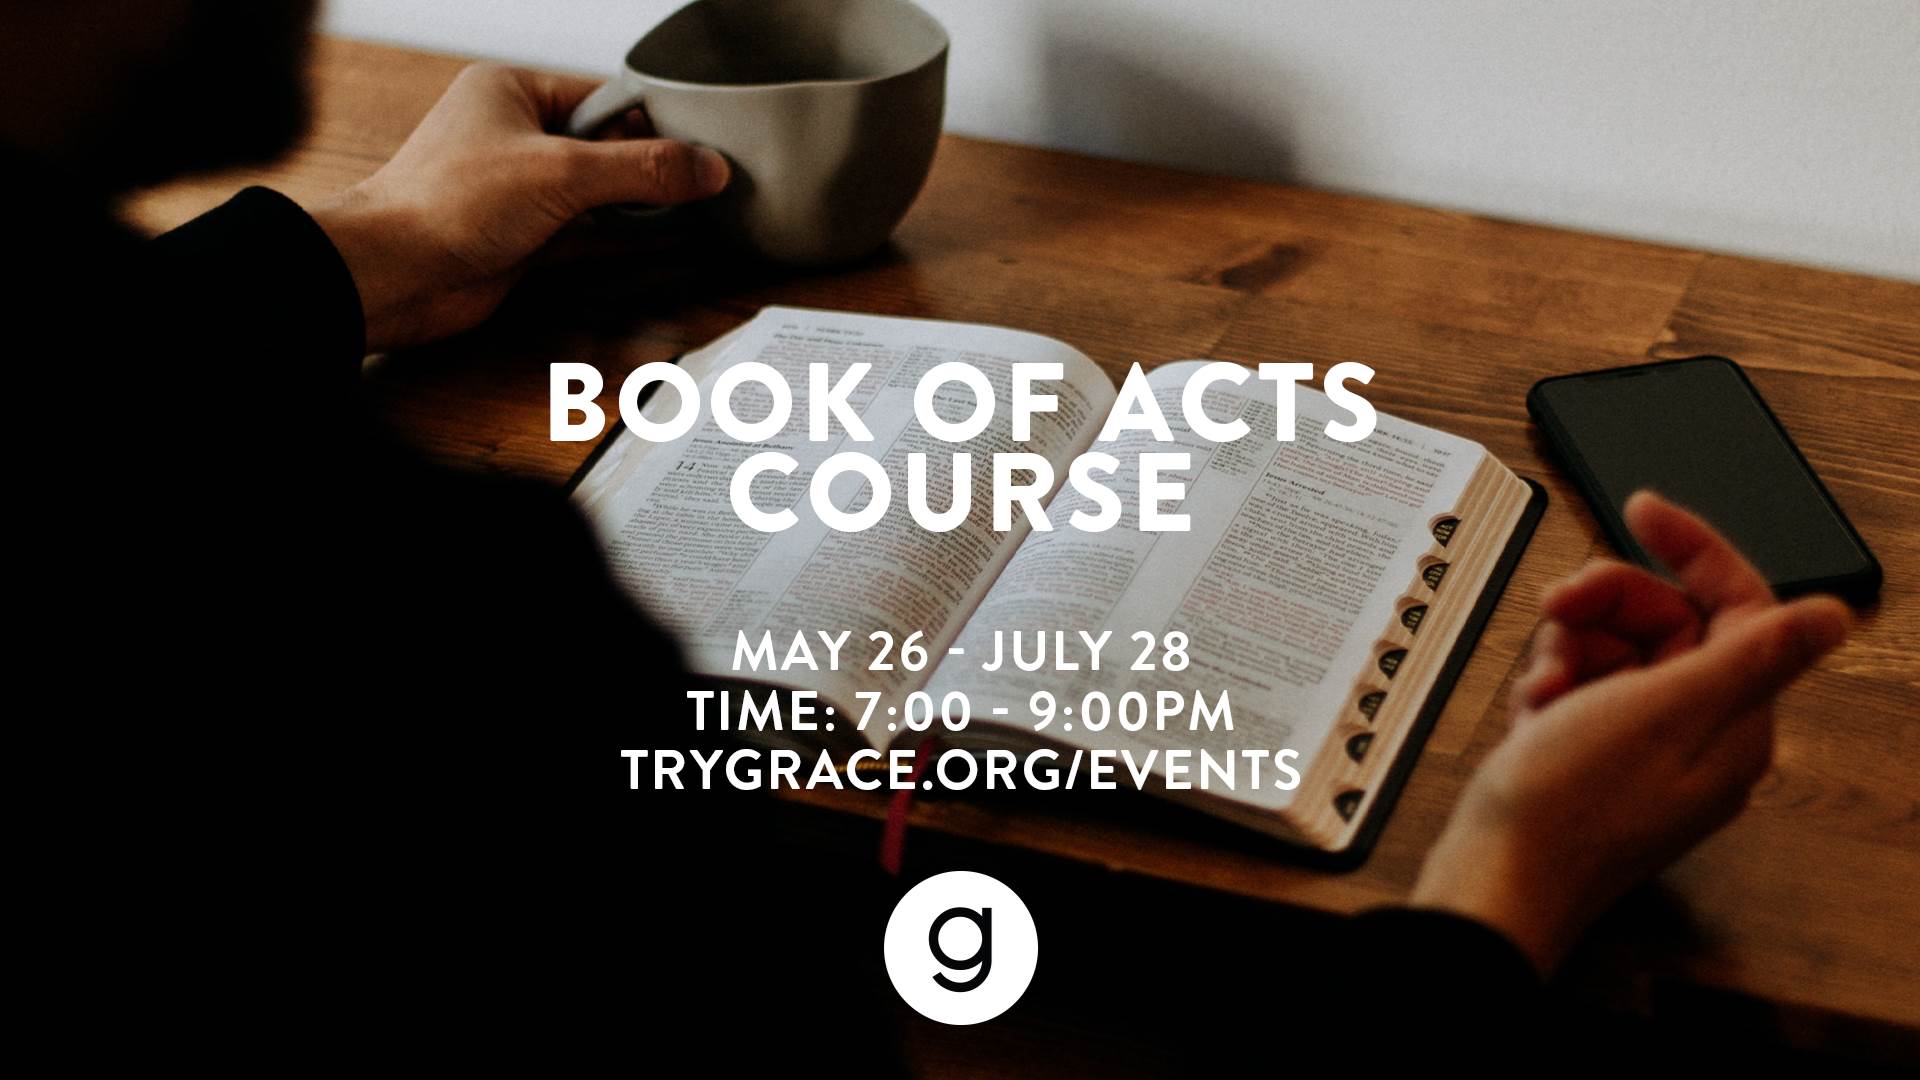 Link to Book of Acts Course detail page